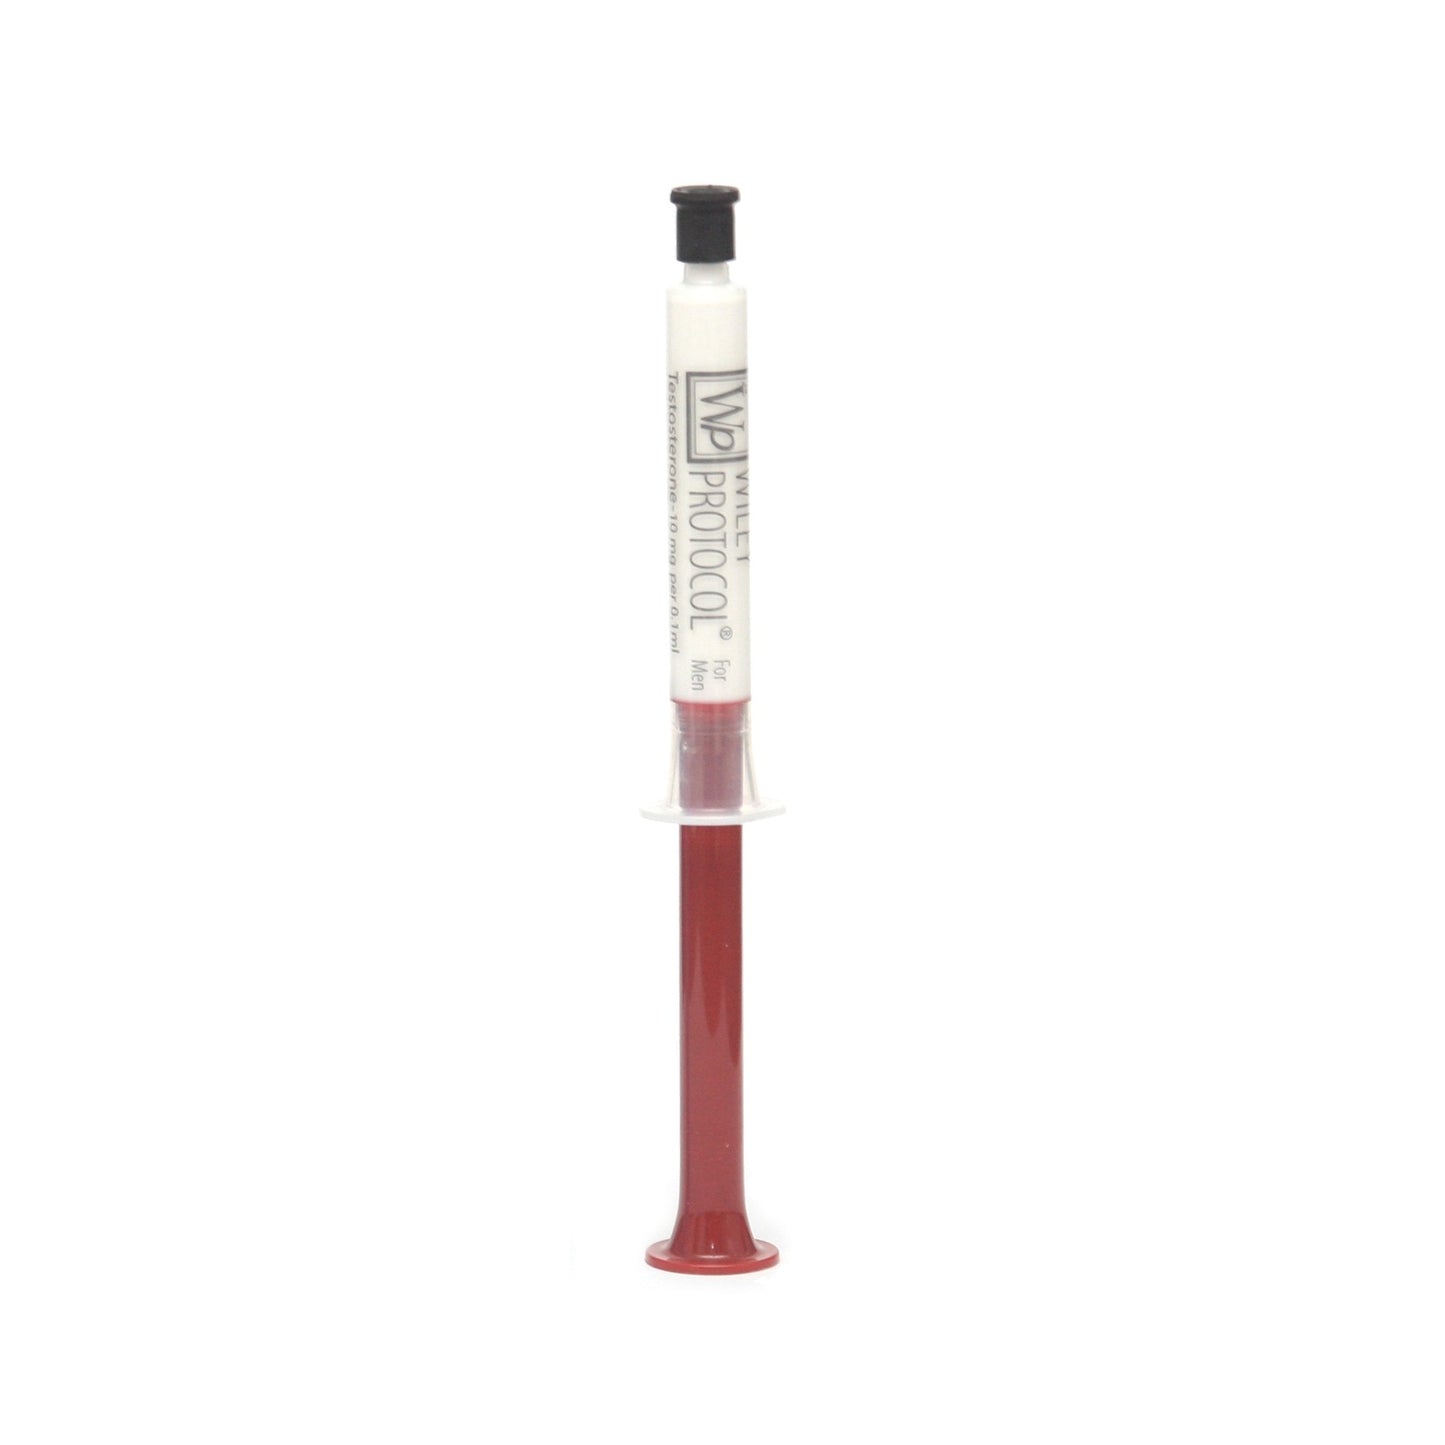 Testosterone Syringes Male - Burgundy (pack of 250)